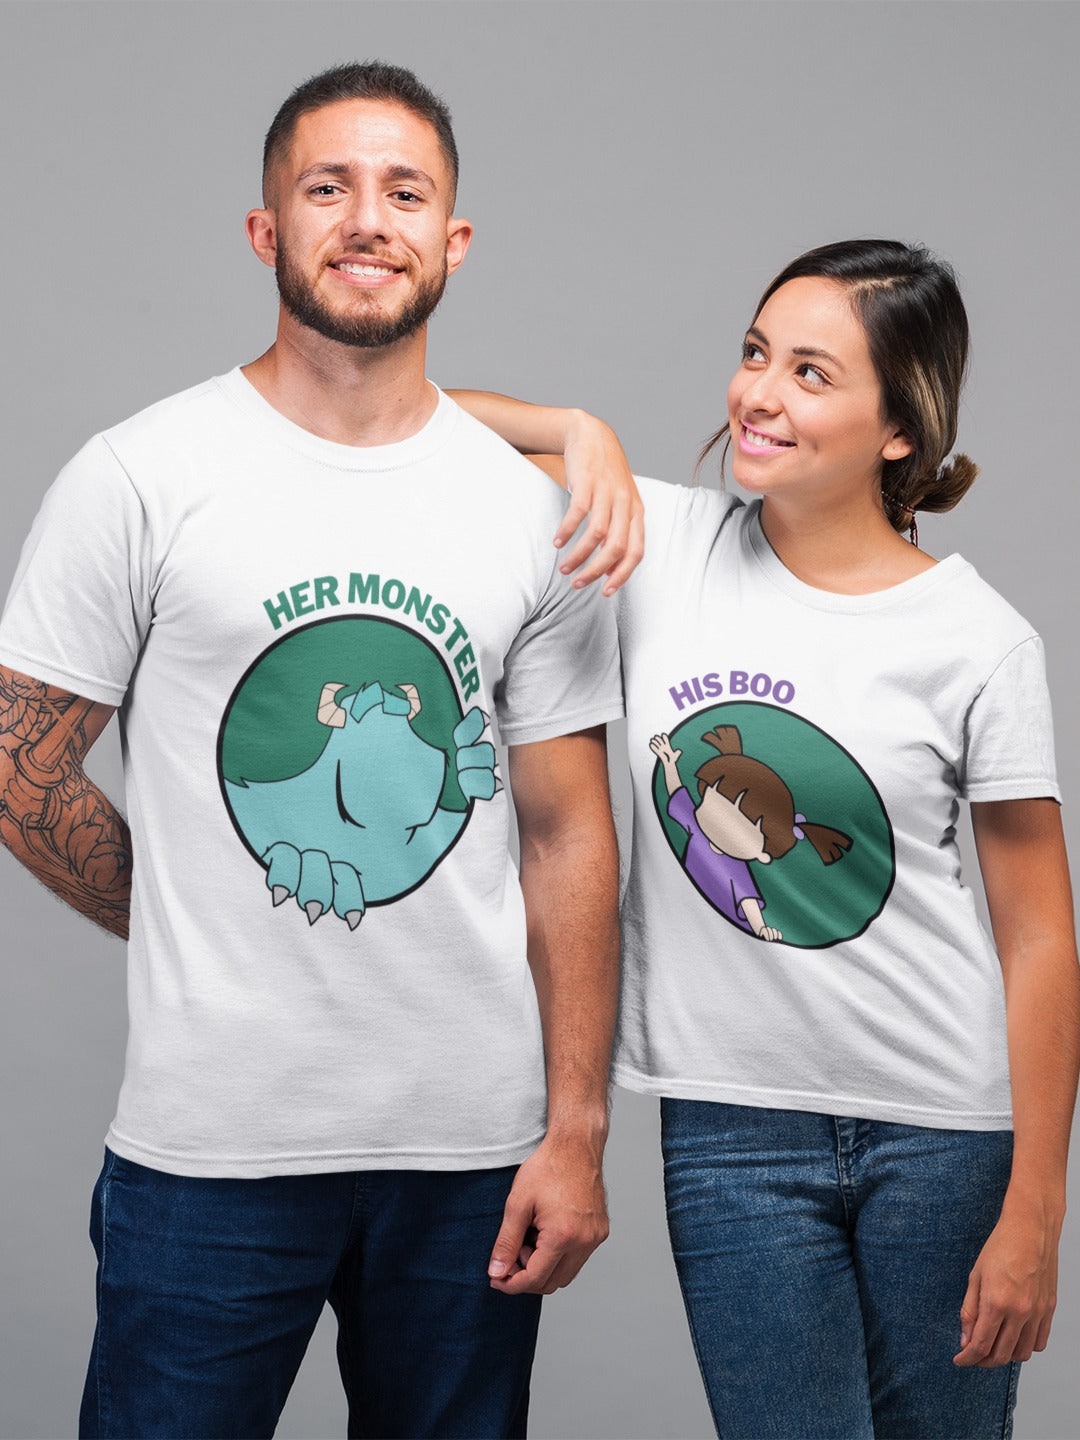 Show off your love for your significant other with our cute white couple t-shirt set! Featuring silhouettes of James and Boo from Monsters Inc., the men's shirt reads "Her Monster" while the women's shirt says "His Boo". Made from high-quality materials, these t-shirts are comfortable and perfect for any occasion. Order yours today!